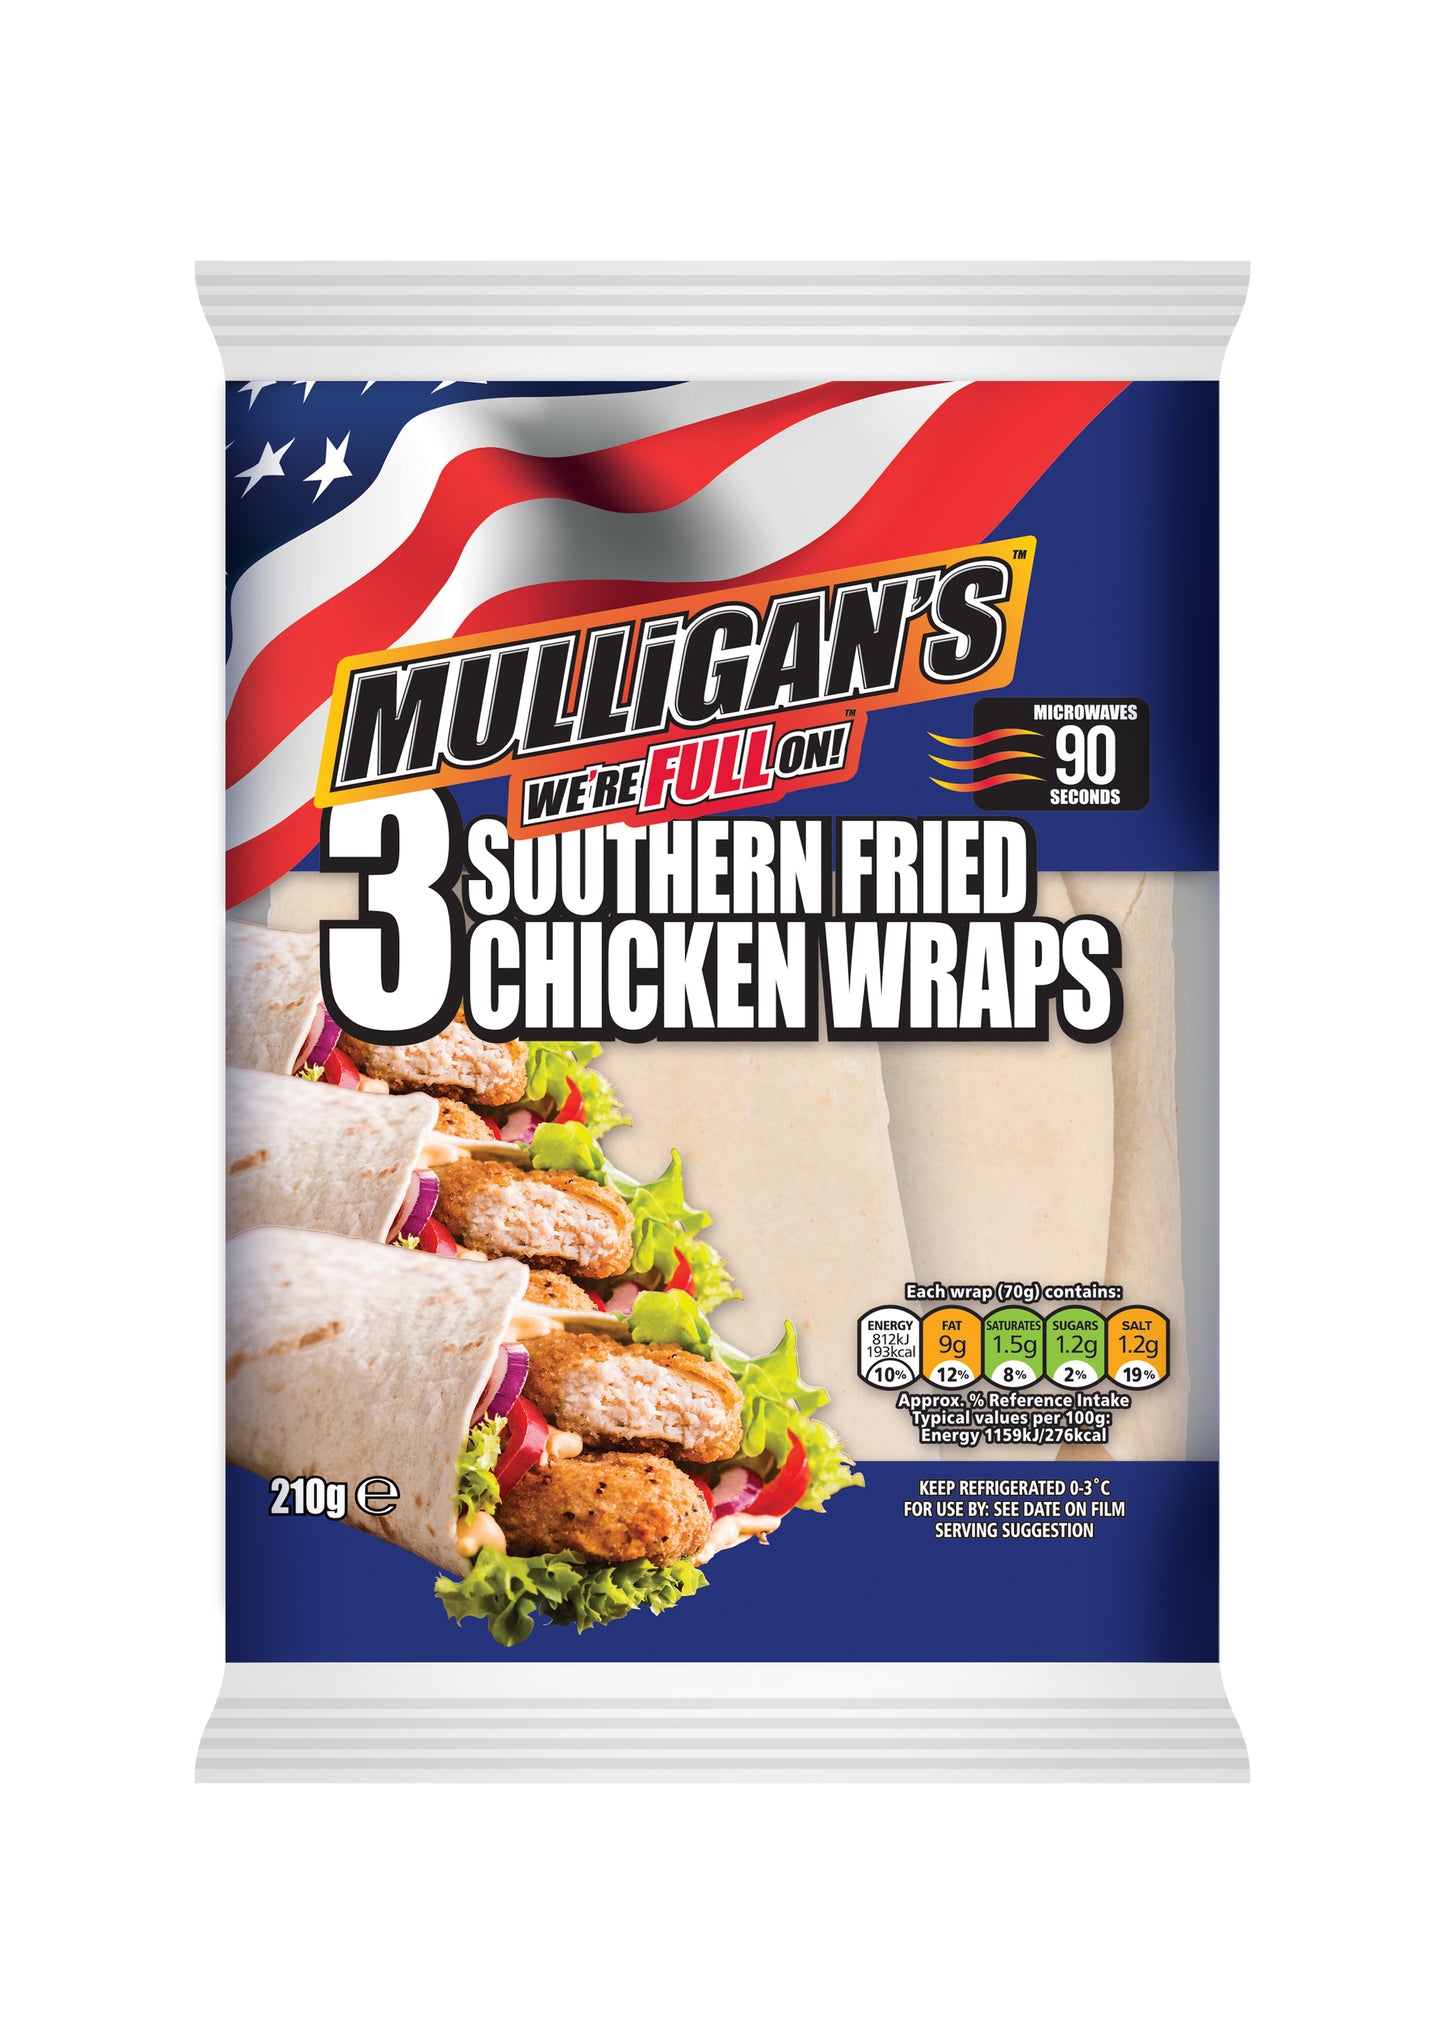 Mulligan's Southern Fried Chicken Wraps 3PK